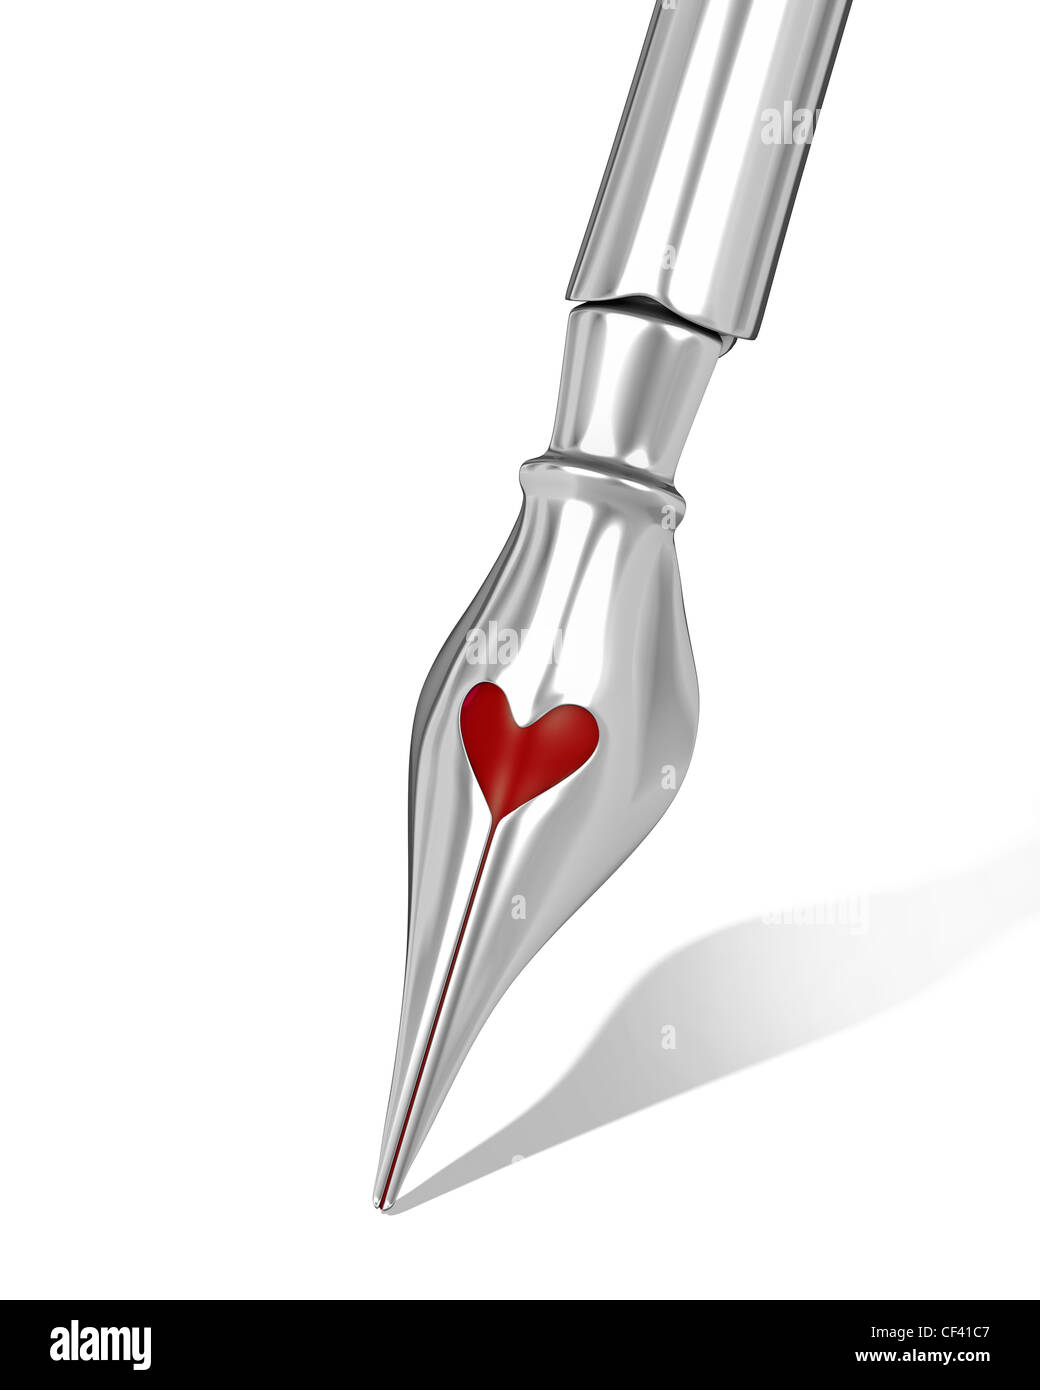 Metal ink pen nib with a heart shaped hole isolated on white background Stock Photo